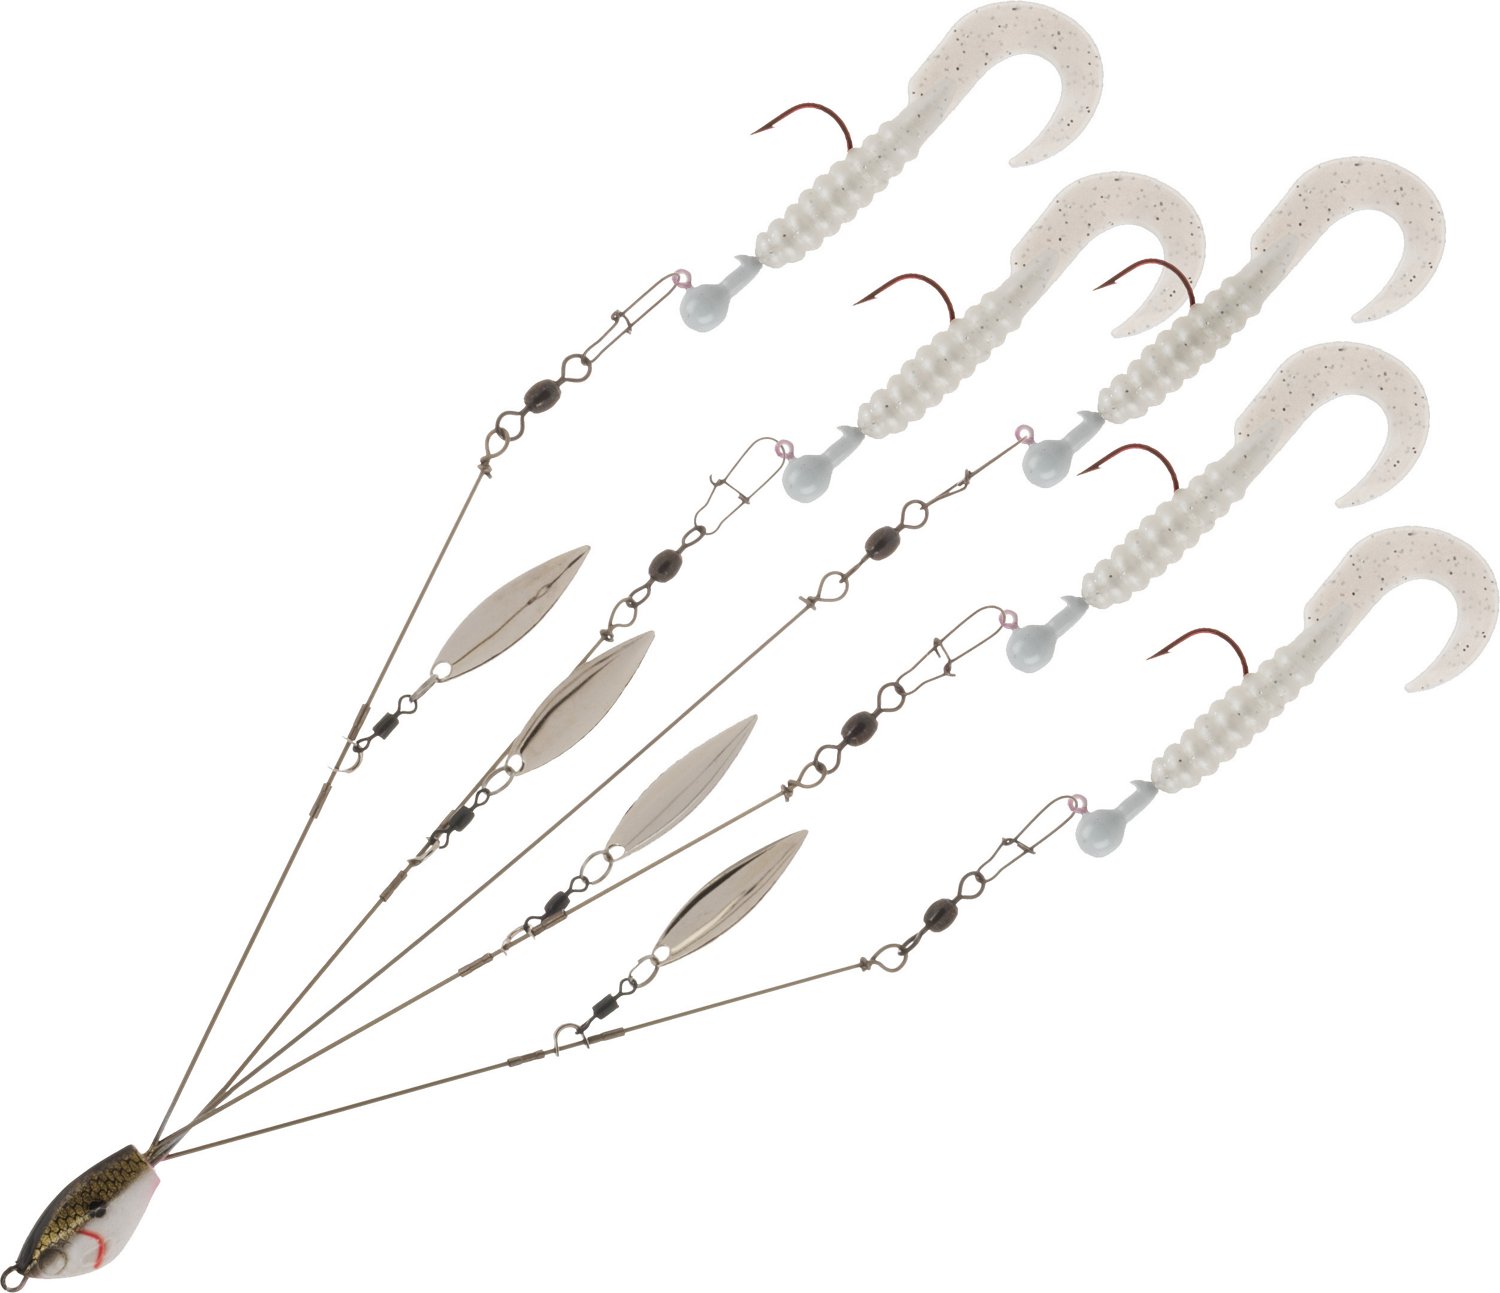  Yum Lures Yumbrella 7-Inch Tennessee Multi-Lure 5 Wire Rig,  Tennesse Special, One Size : Fishing Bait Rigs : Sports & Outdoors